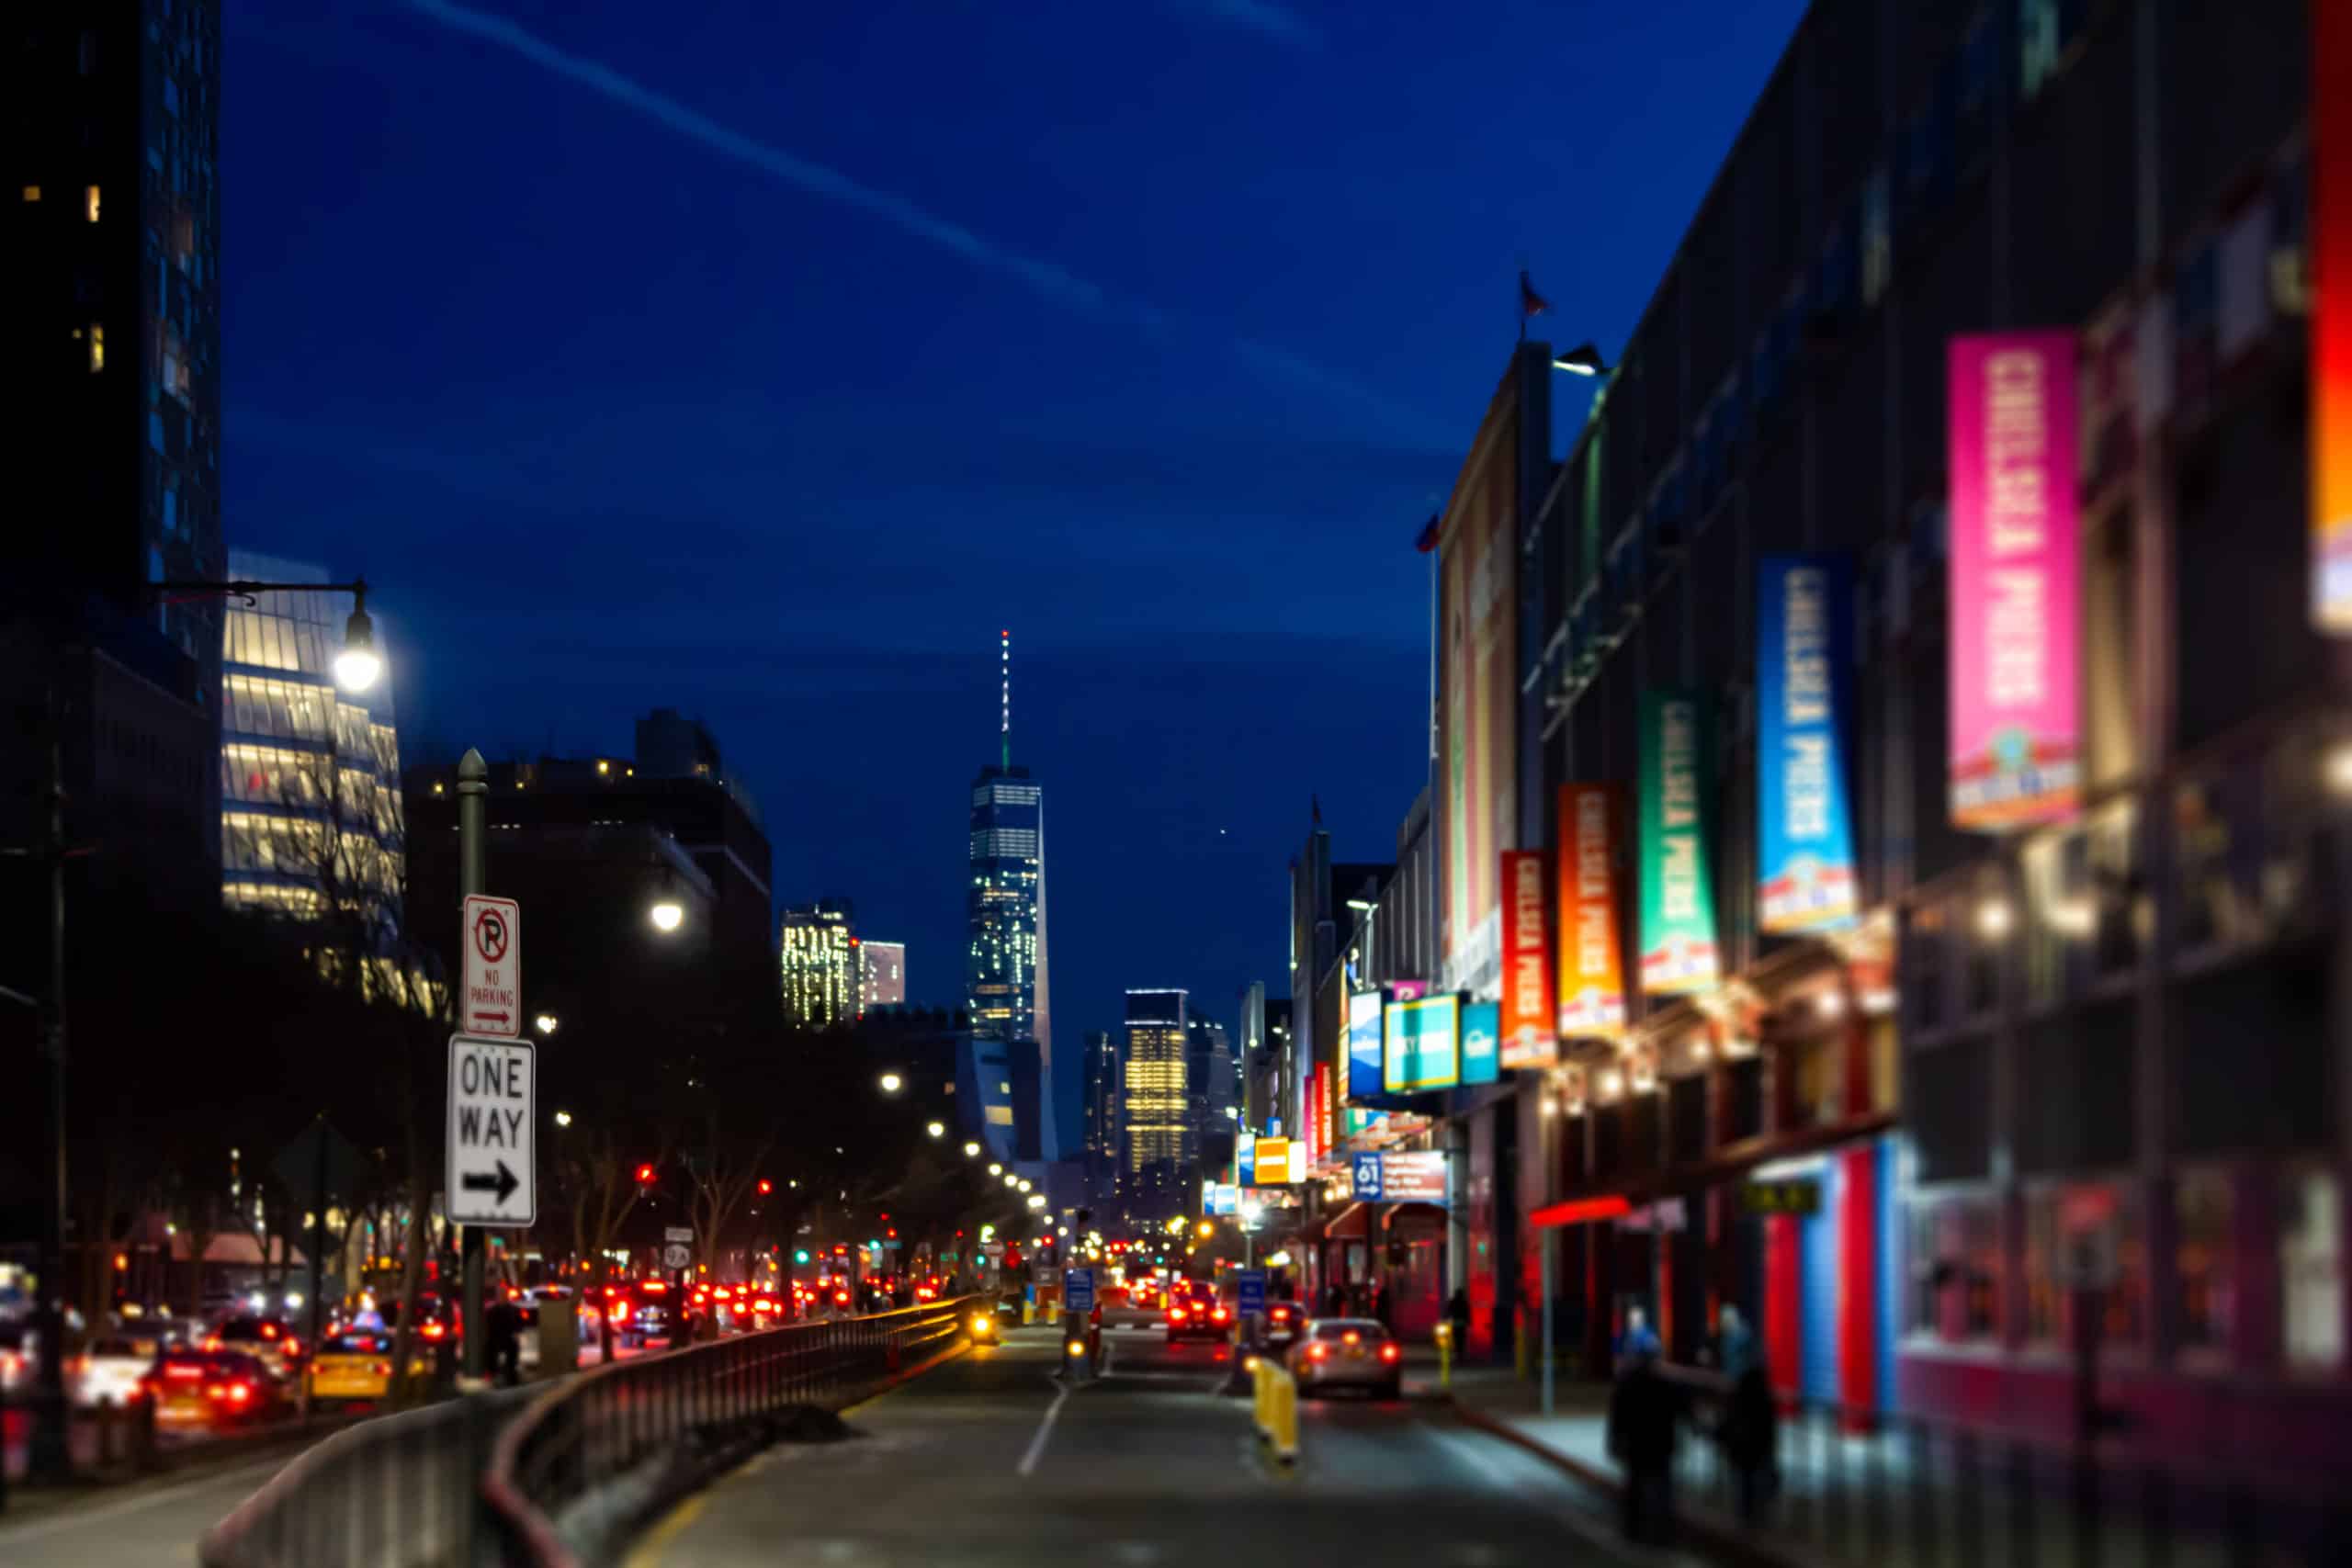 New York City night street scene at Chelsea Pier with blurred lights.